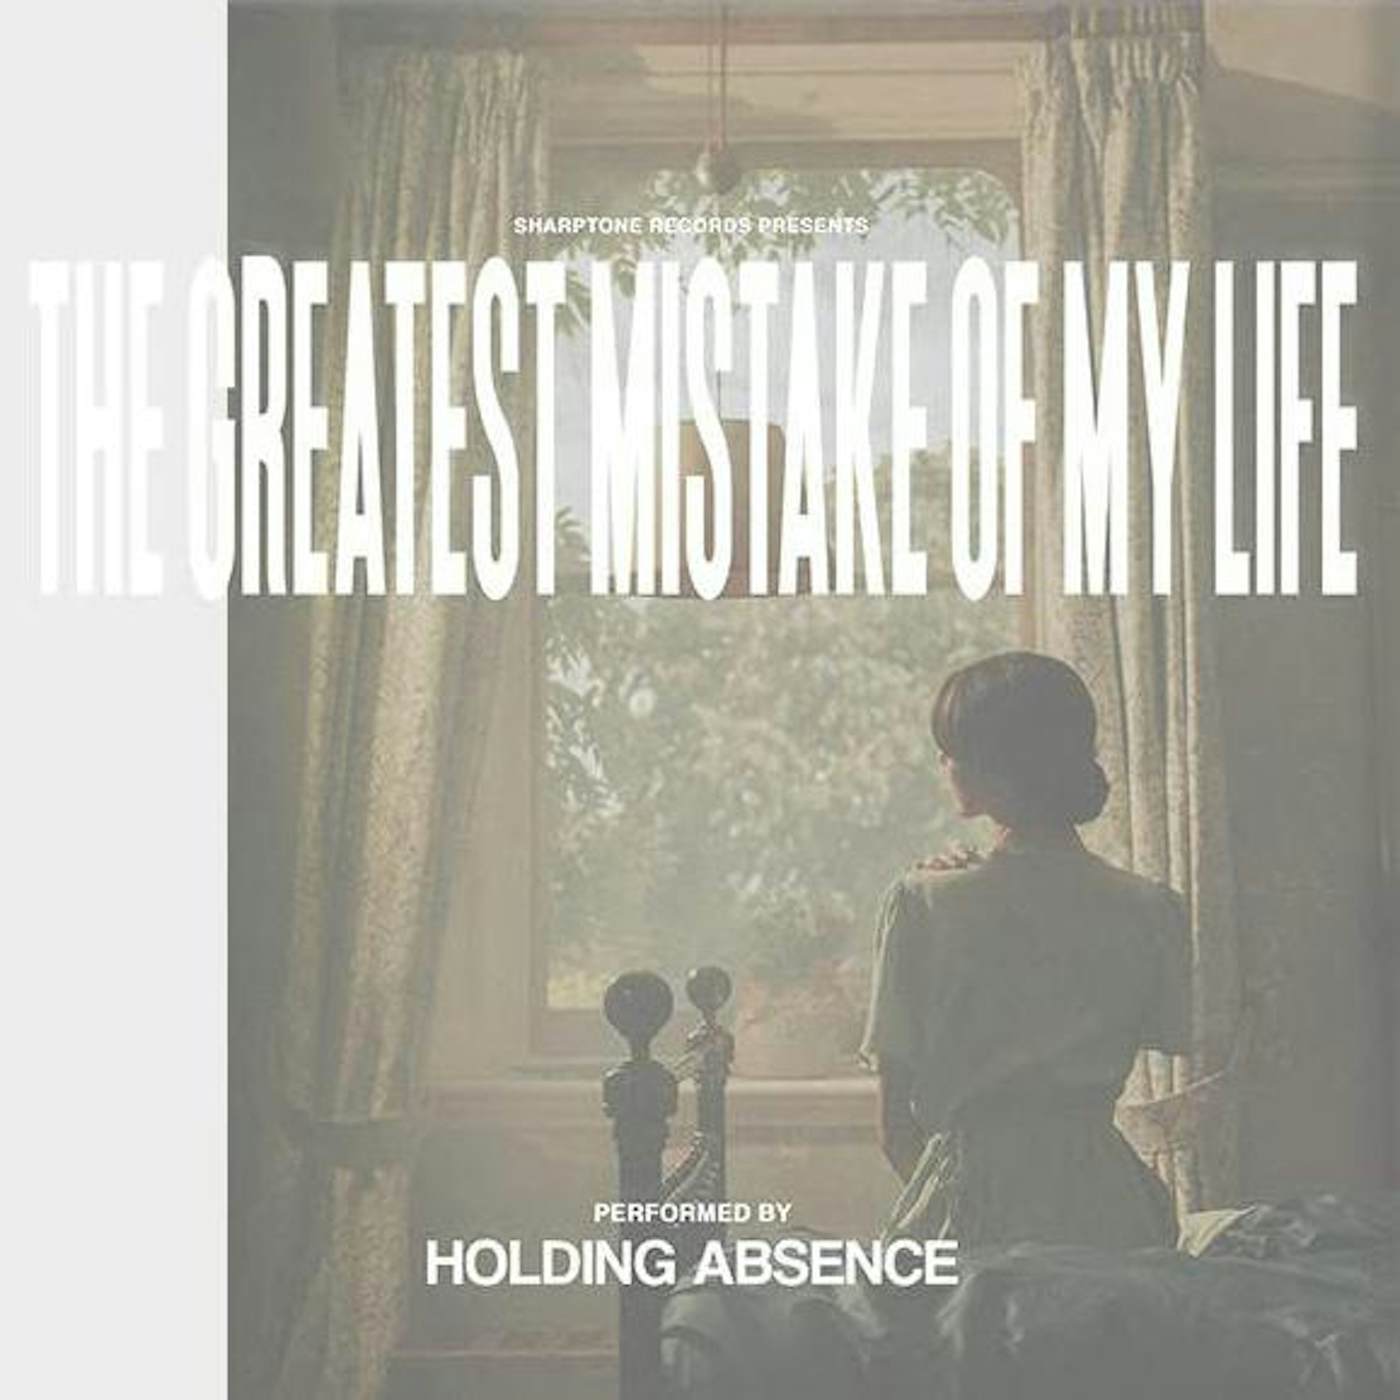 Holding Absence Greatest Mistake Of My Life - Pink & Purple Marble Vinyl Record